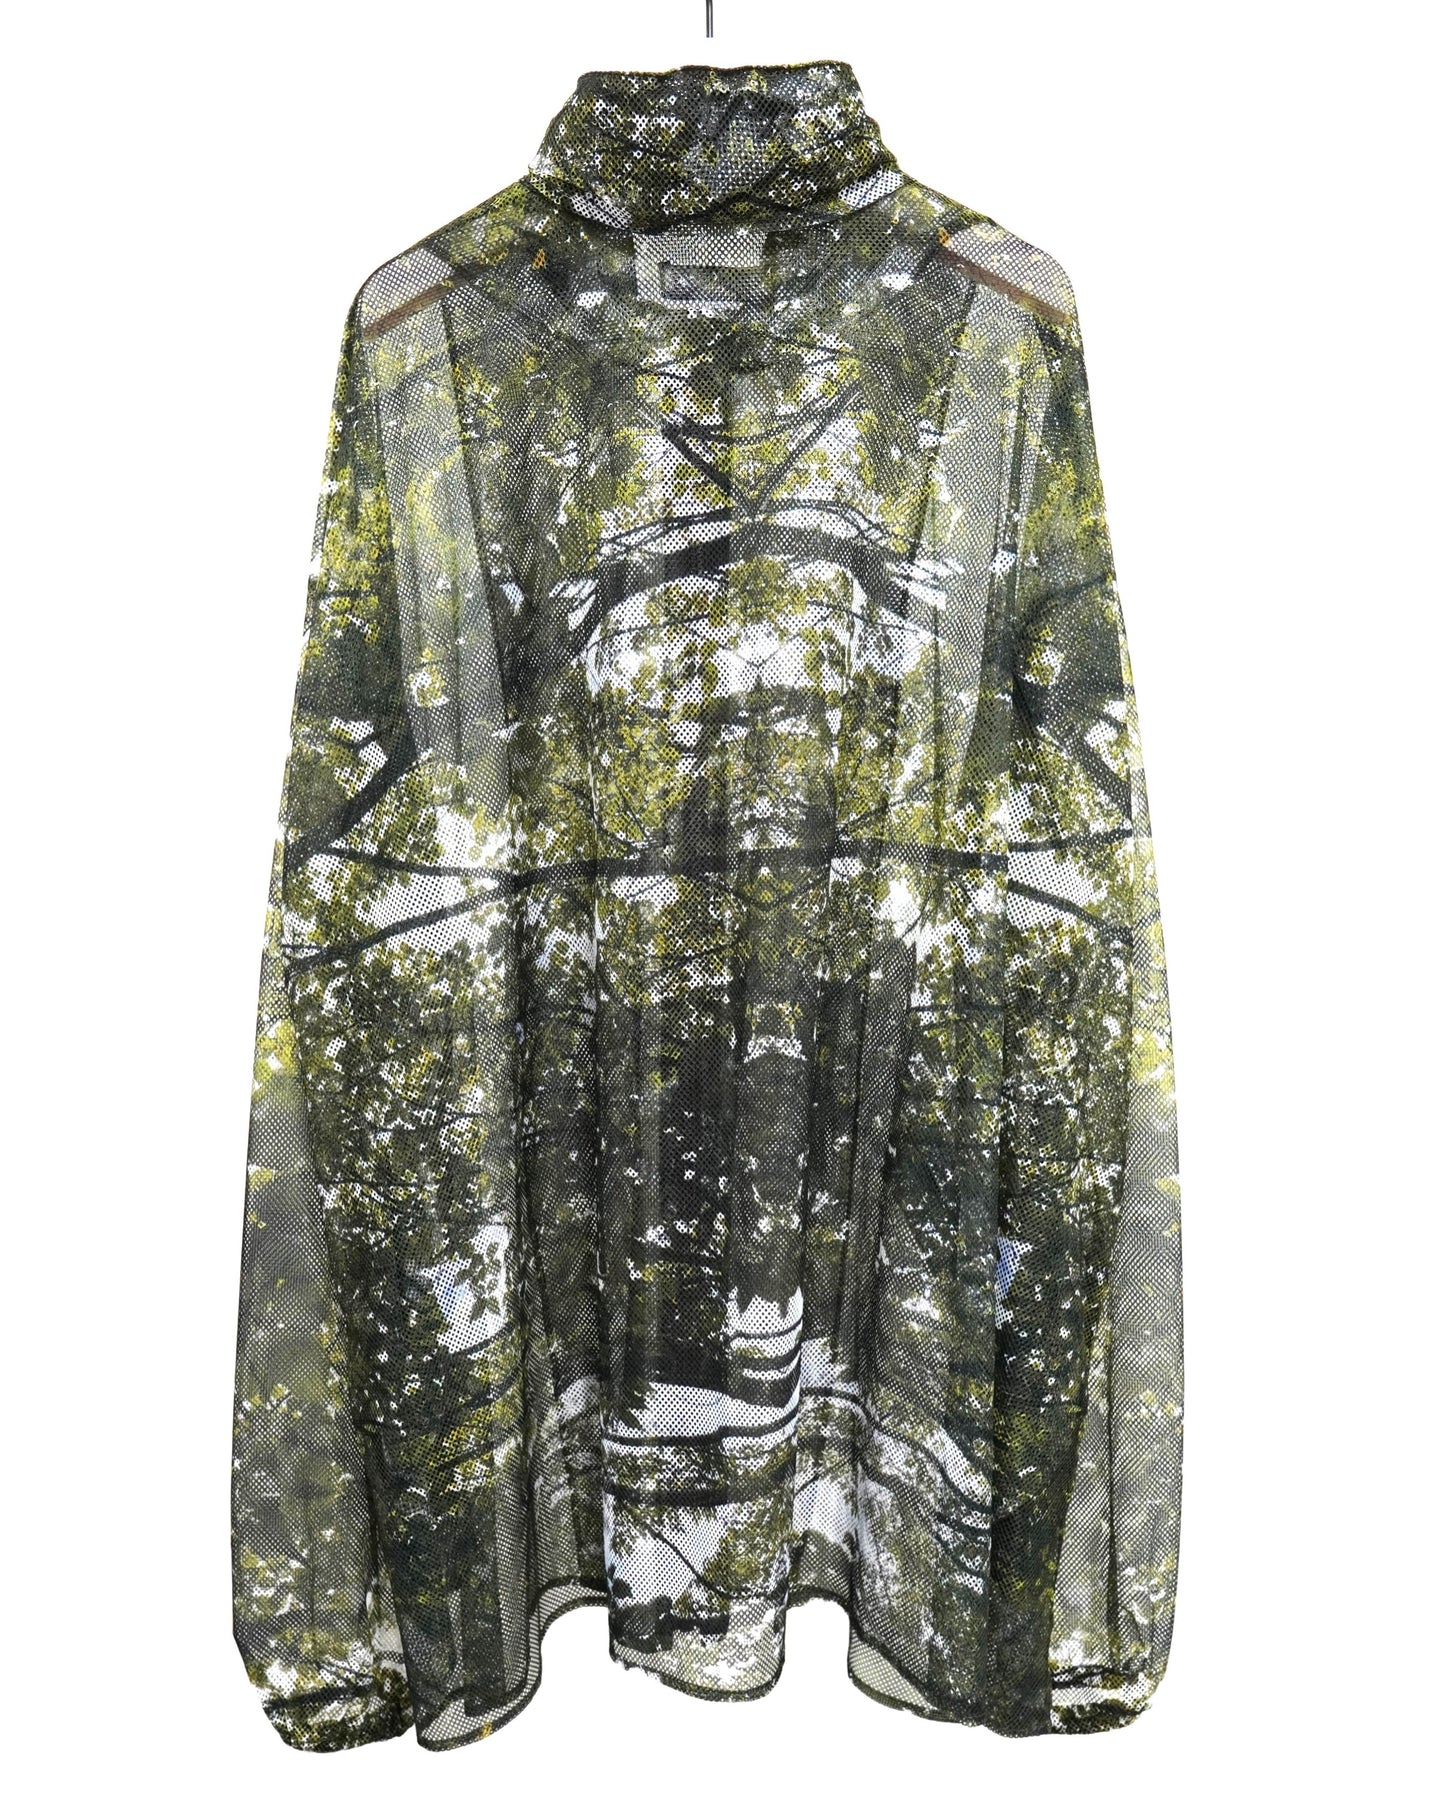 NON TOKYO / PRINT MESH ZIP-UP PARKA (FOREST) / 〈ノントーキョー〉プリントメッシュジップアップパーカー (フォレスト)